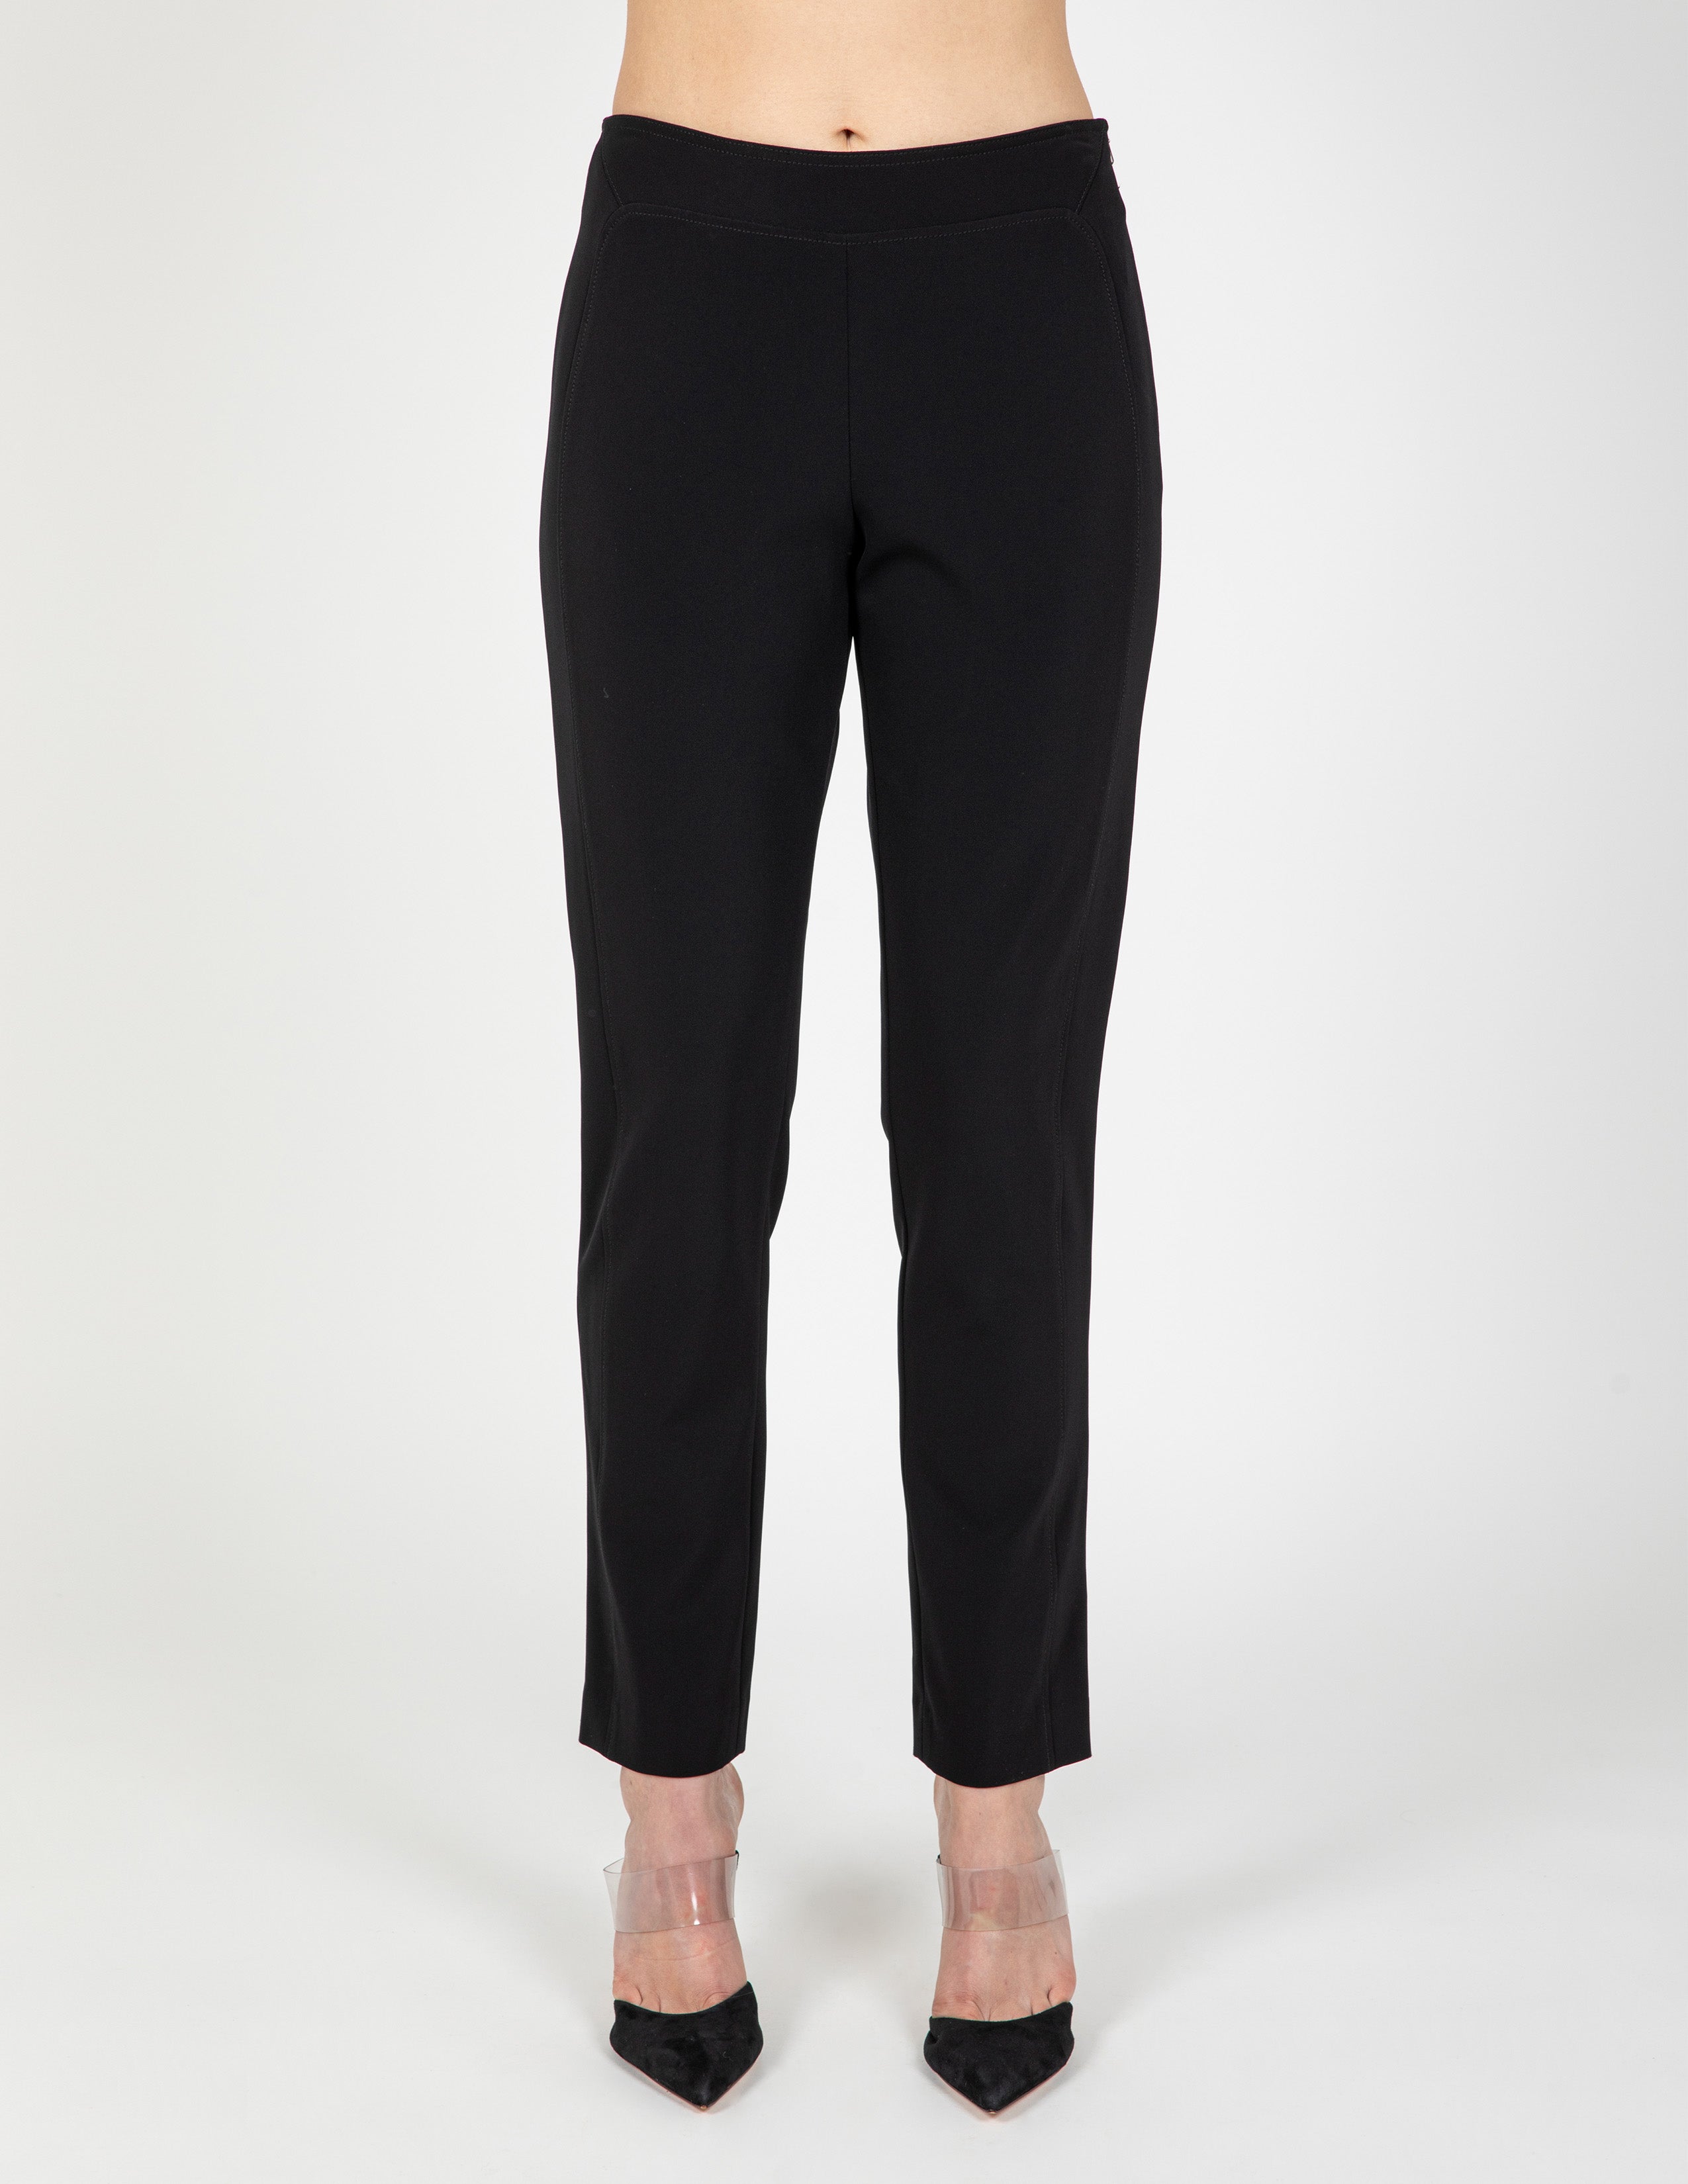 Women's High-Rise Zip-Front Skinny Ankle Pants - Kosovo